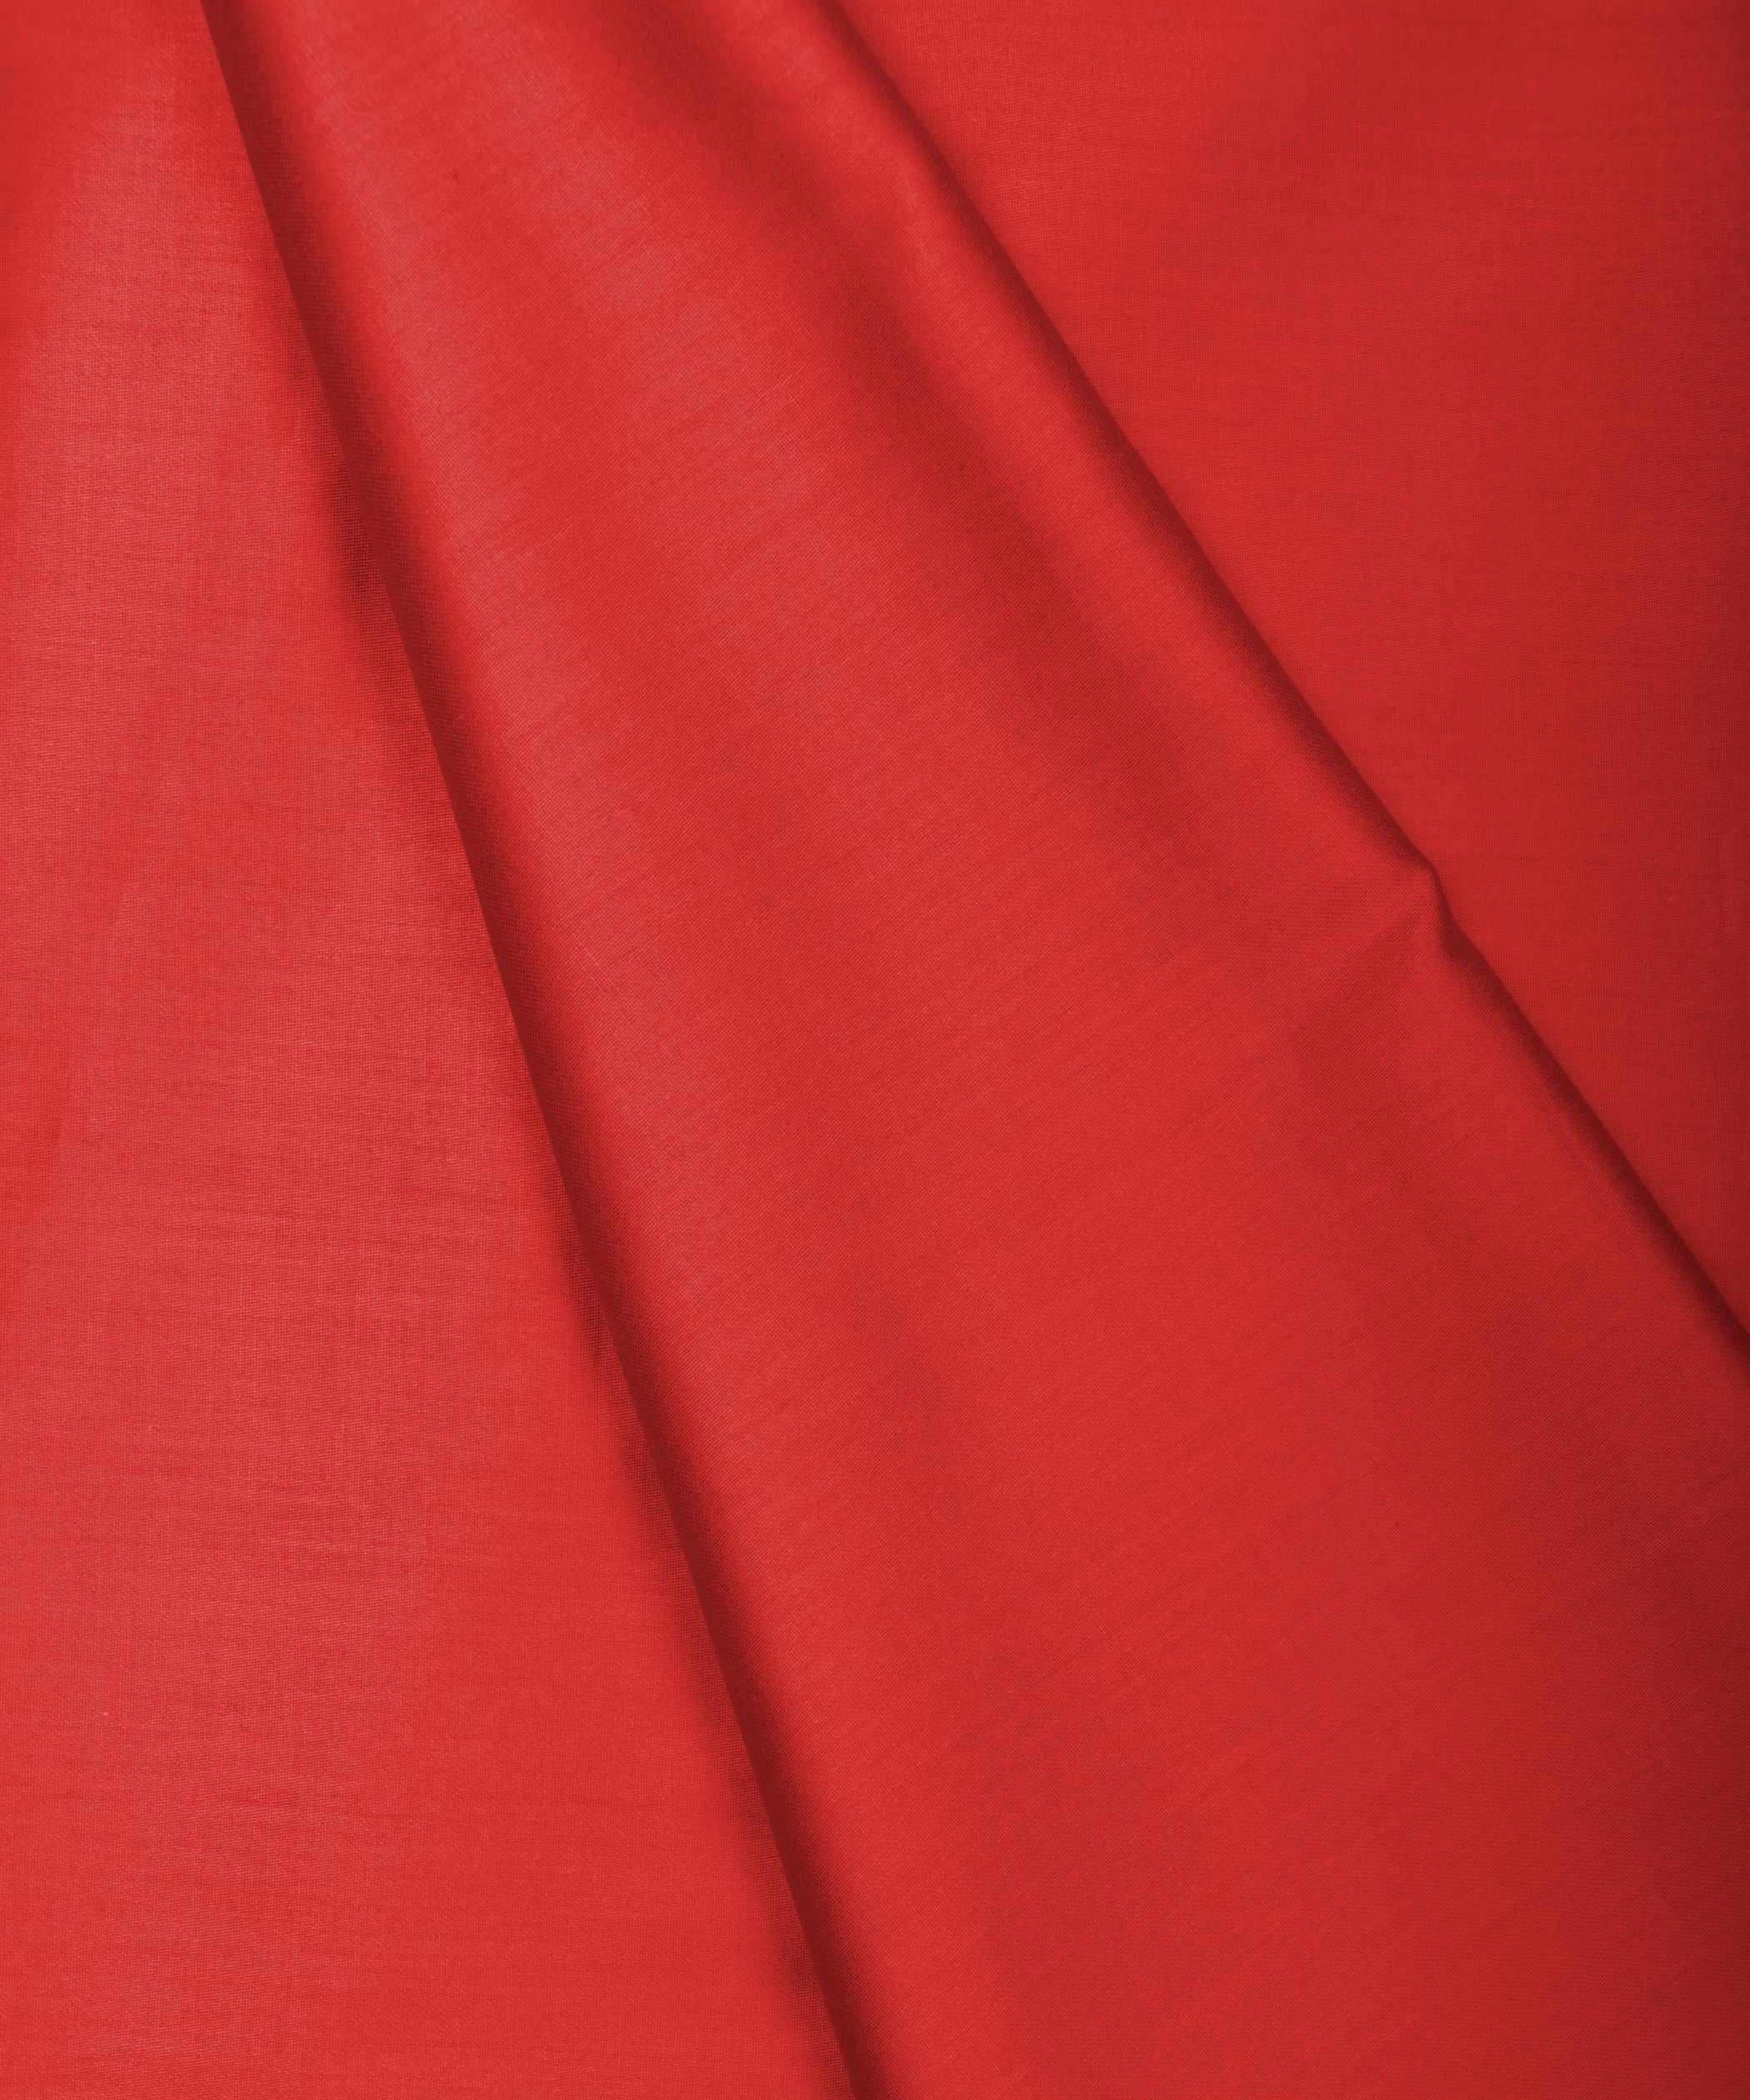 Red Plain Dyed Cotton Satin Fabric